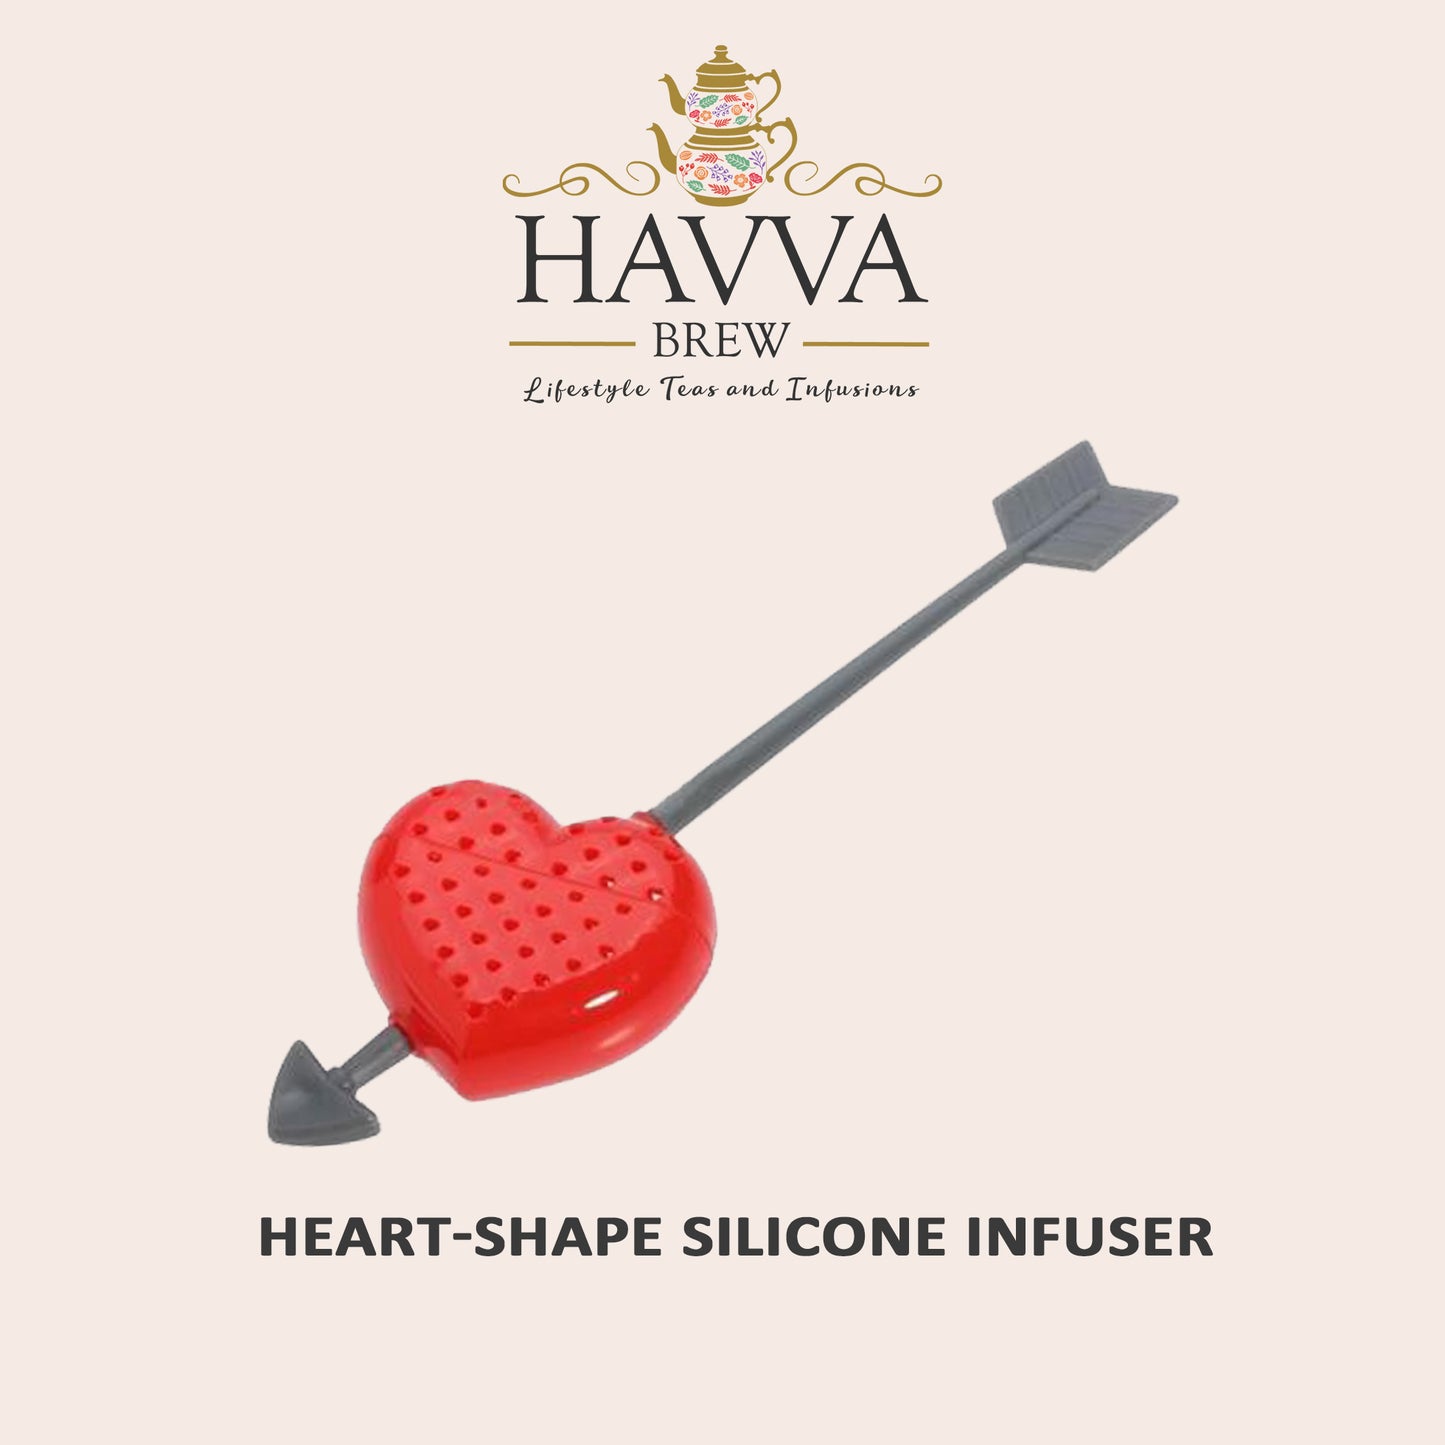 Heart-Shaped Silicone Infuser